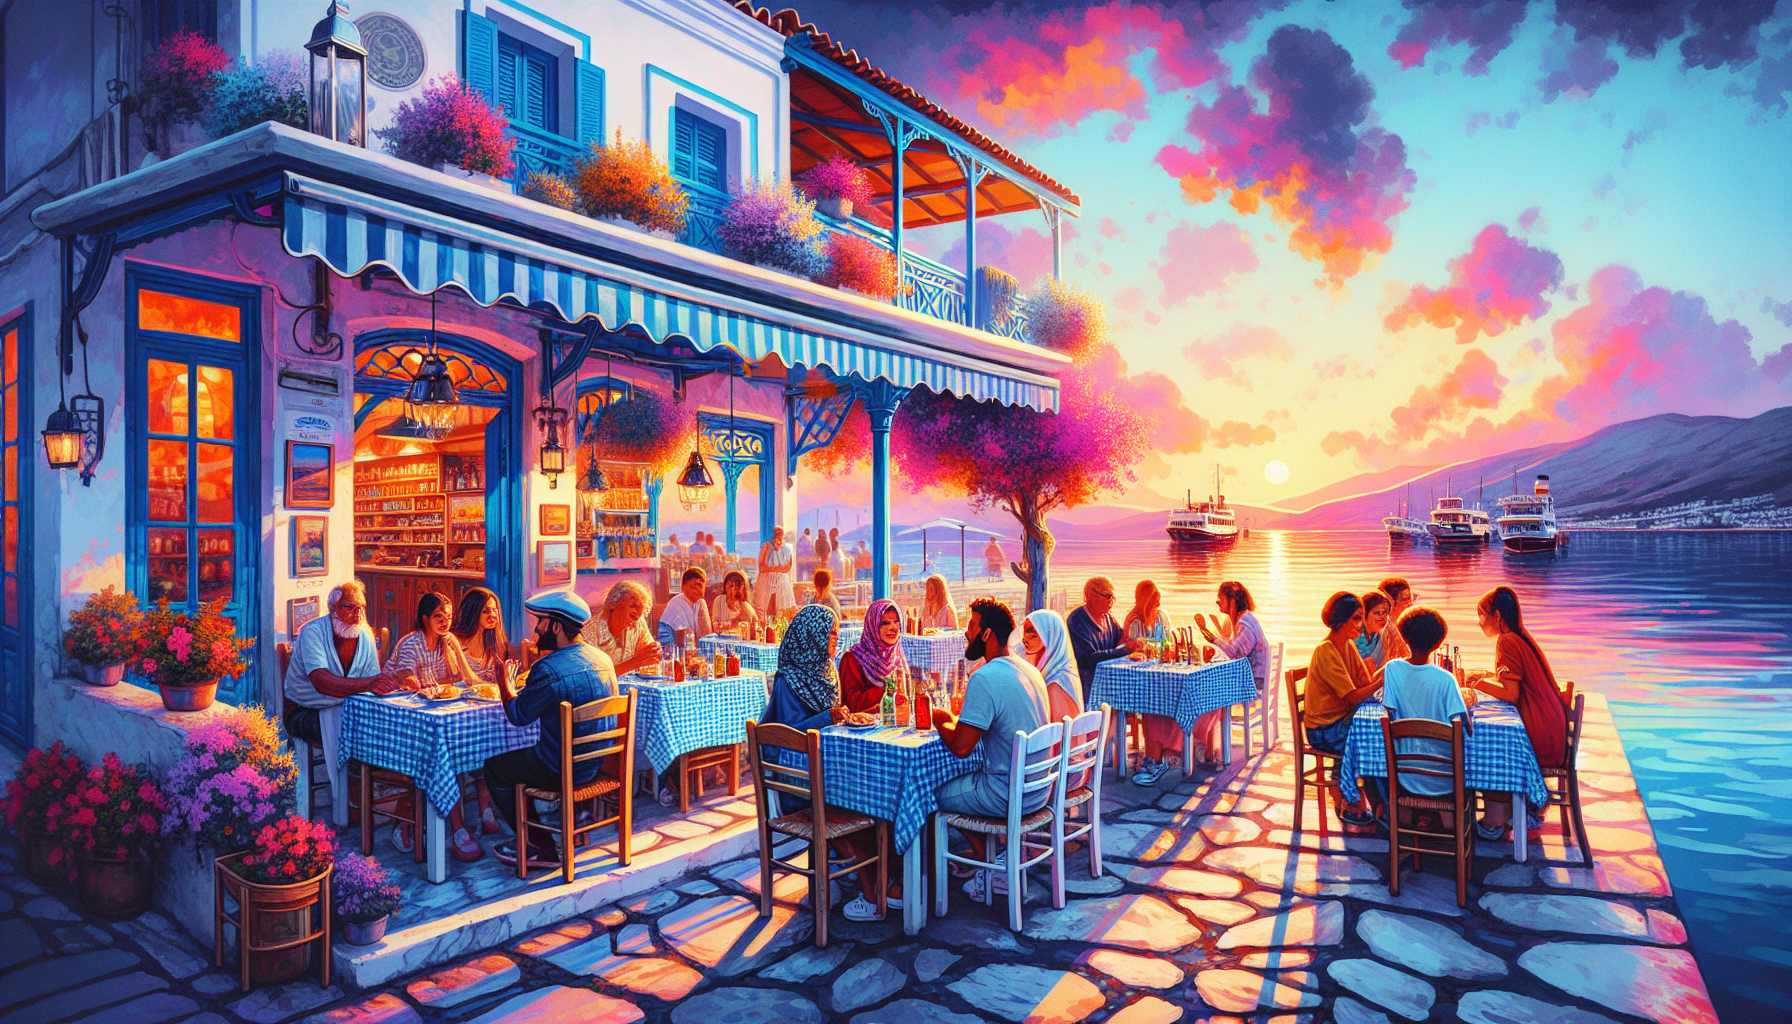 Scenic view of waterfront Greek dining with charming ambiance